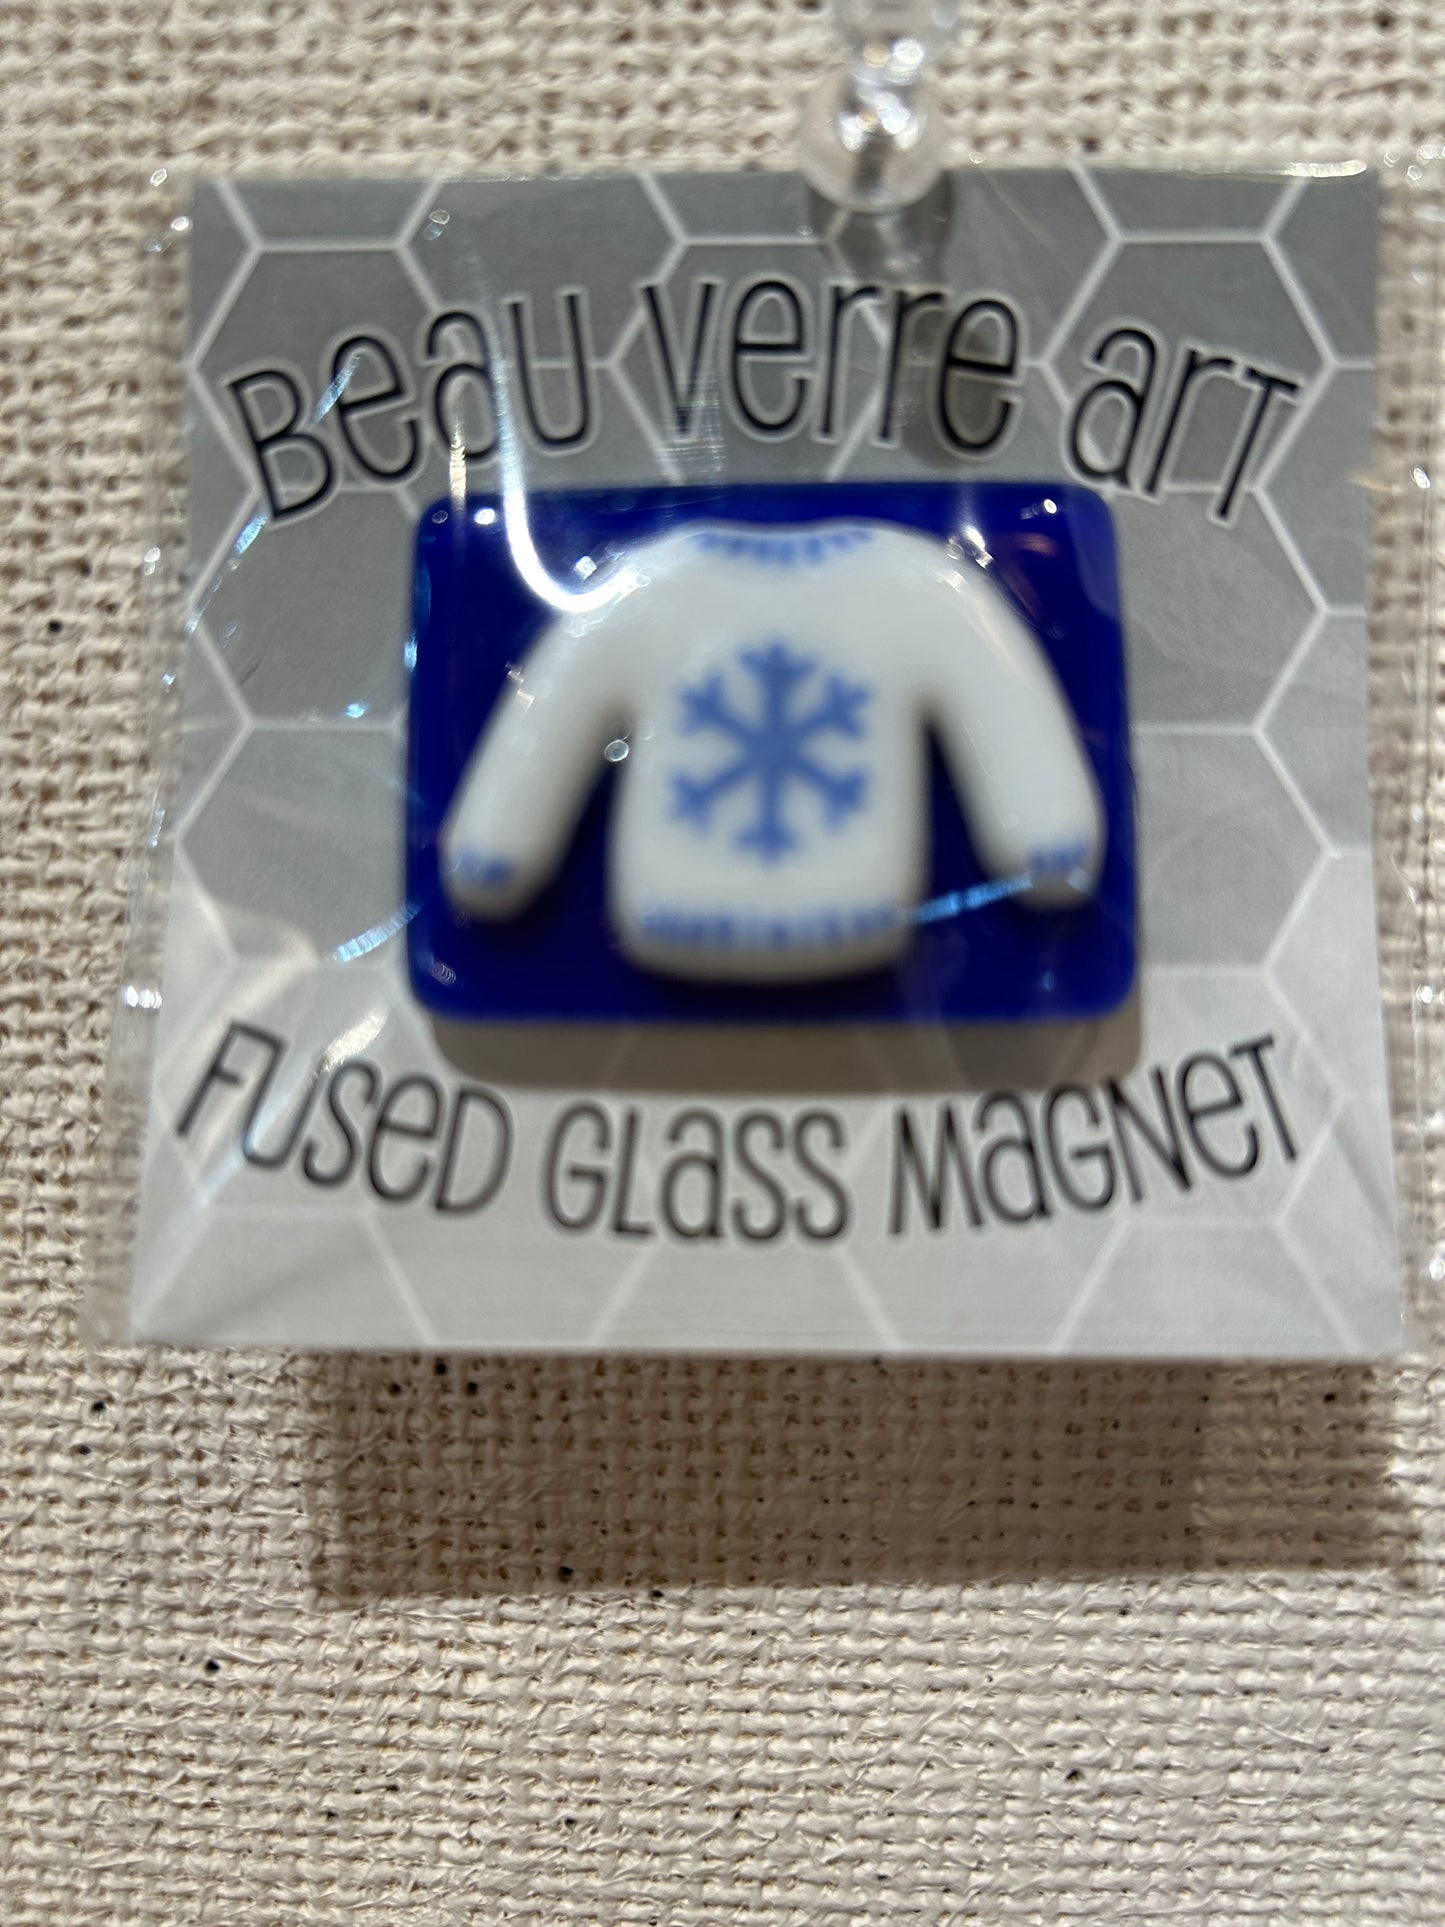 Snowflake Sweater Fused Glass Magnet